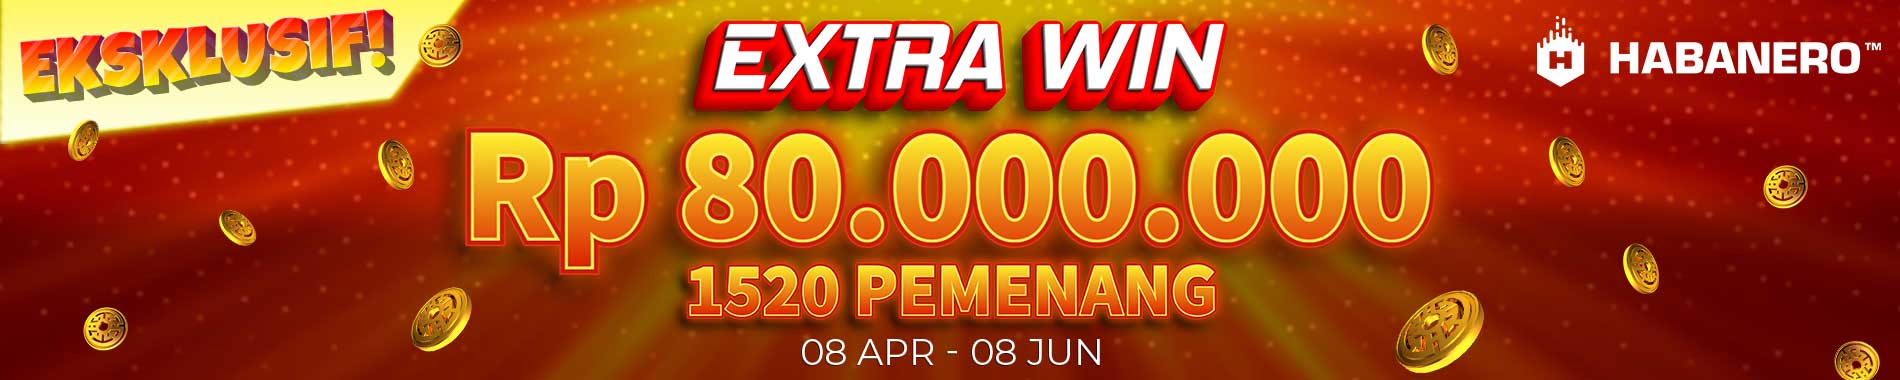 LUX88TOGEL